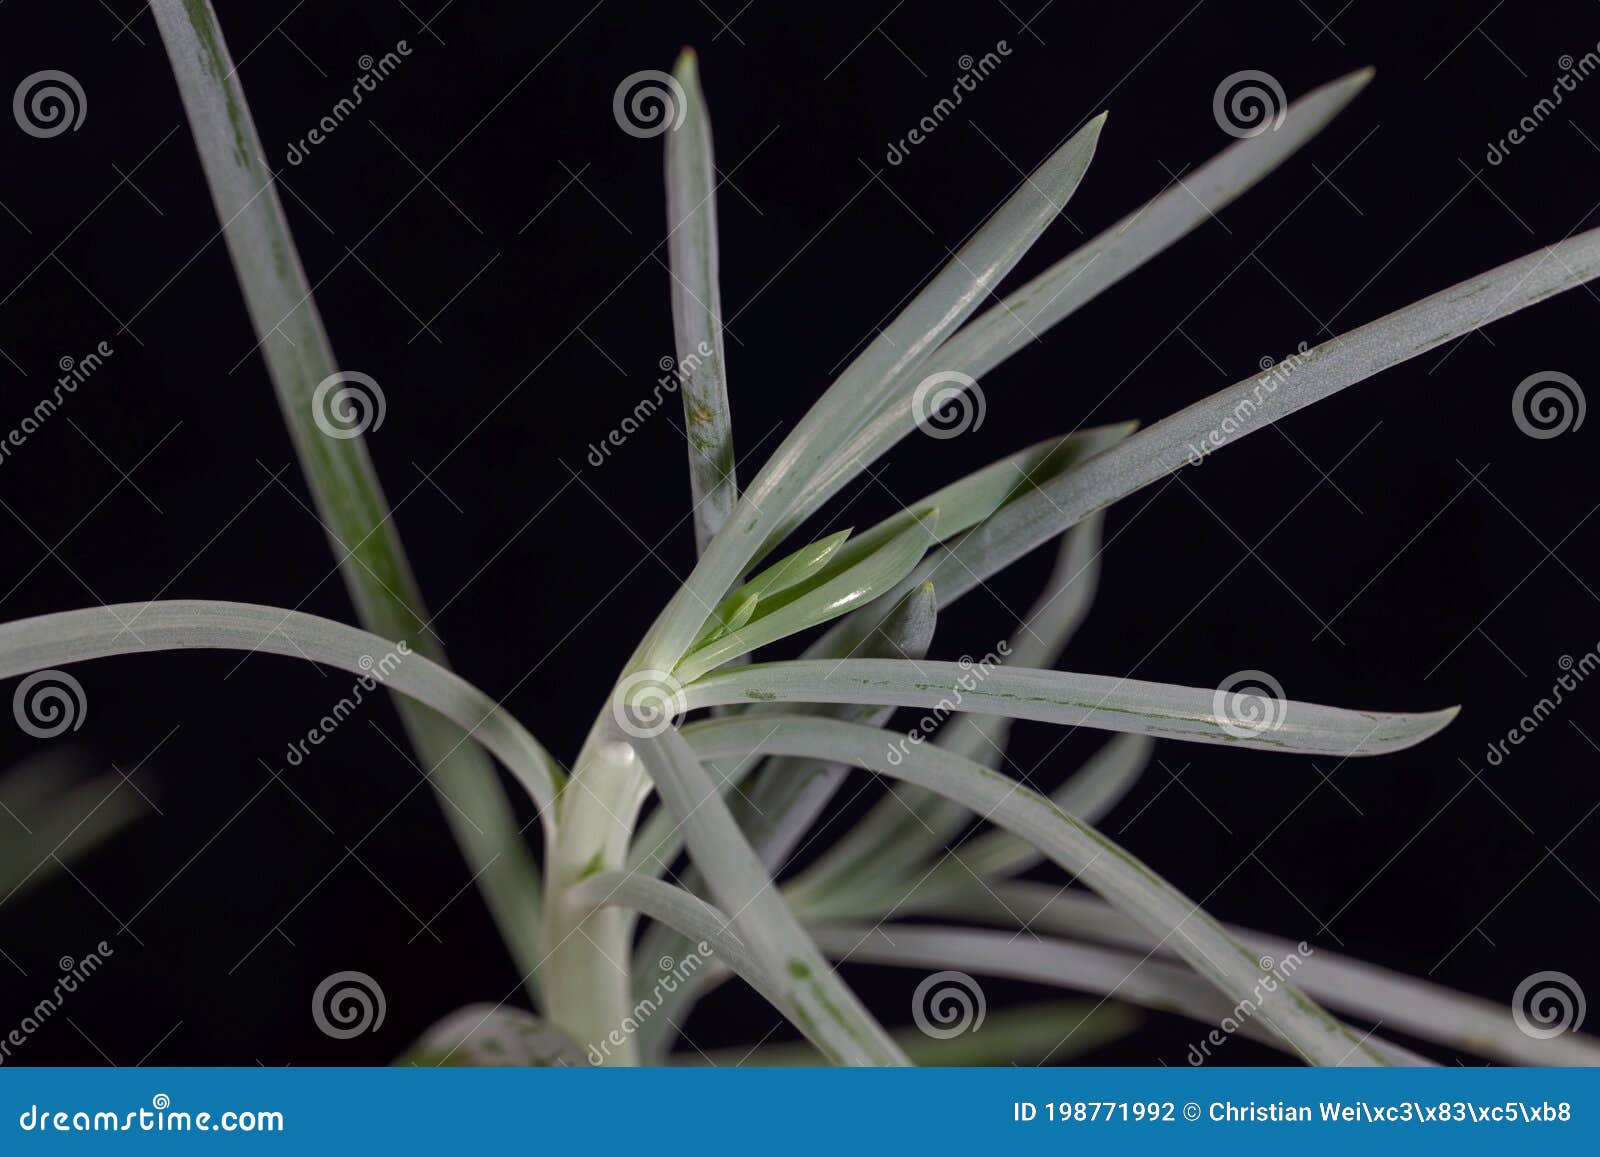 leaves of a blue chalkstick, curio repens